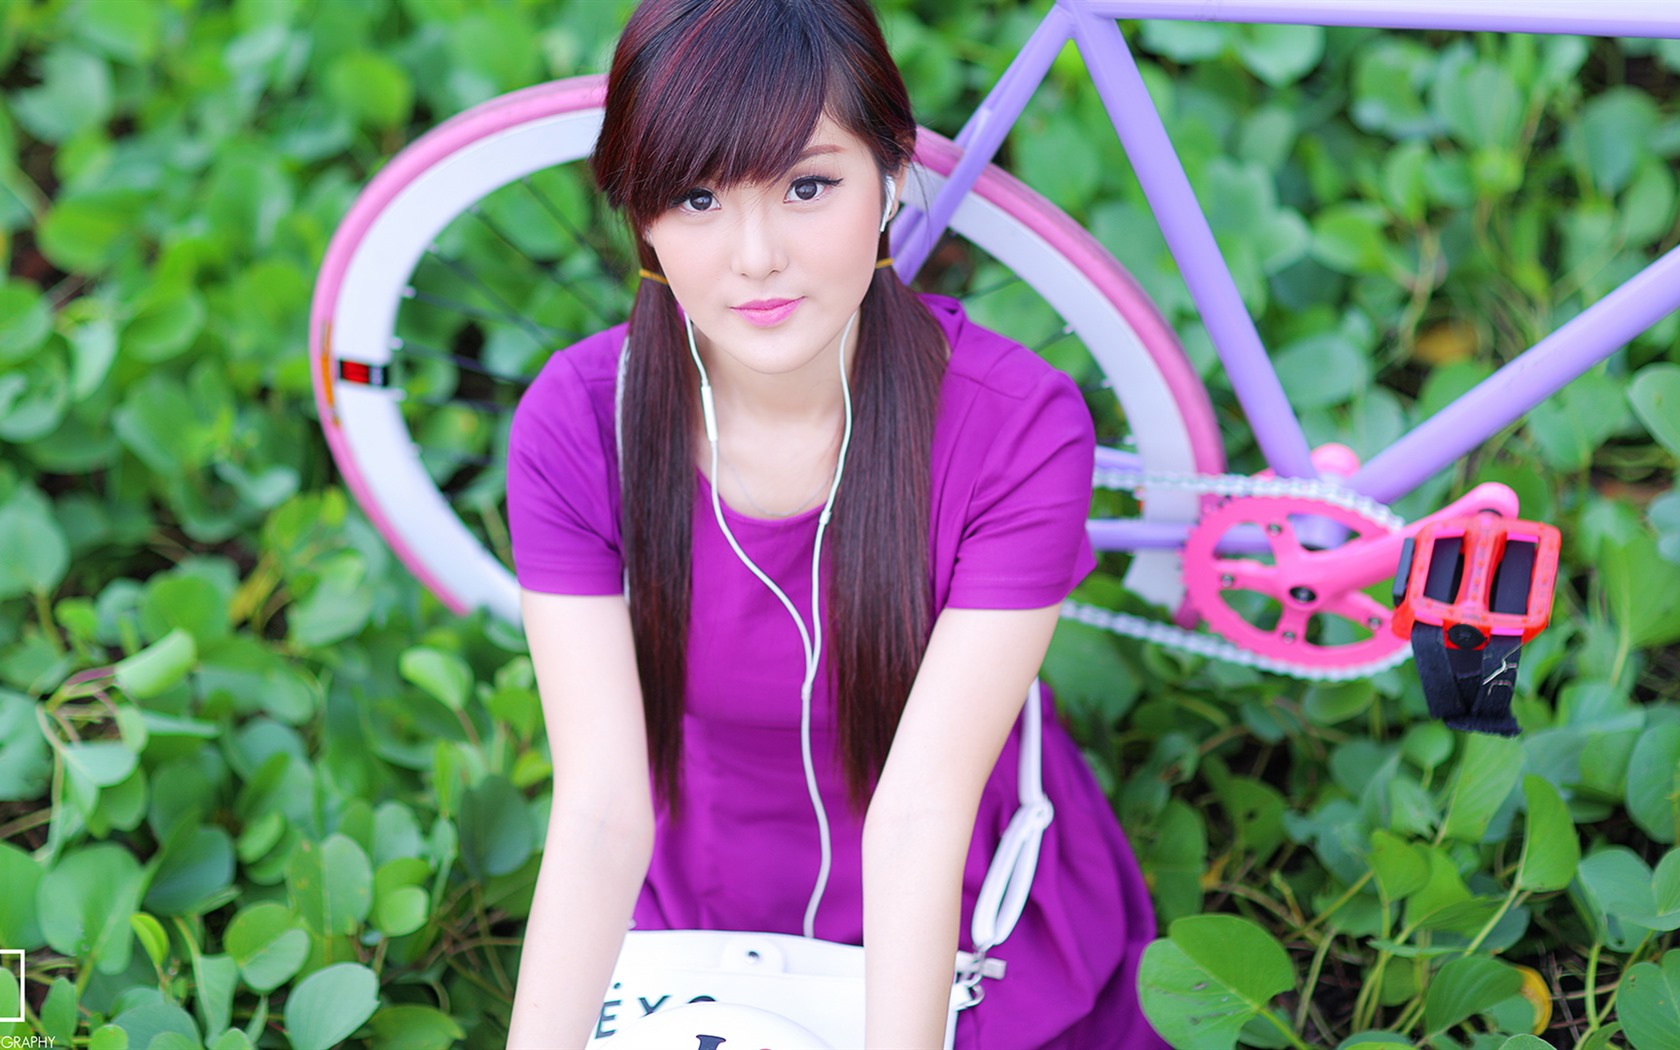 Pure and lovely young Asian girl HD wallpapers collection (5) #34 - 1680x1050